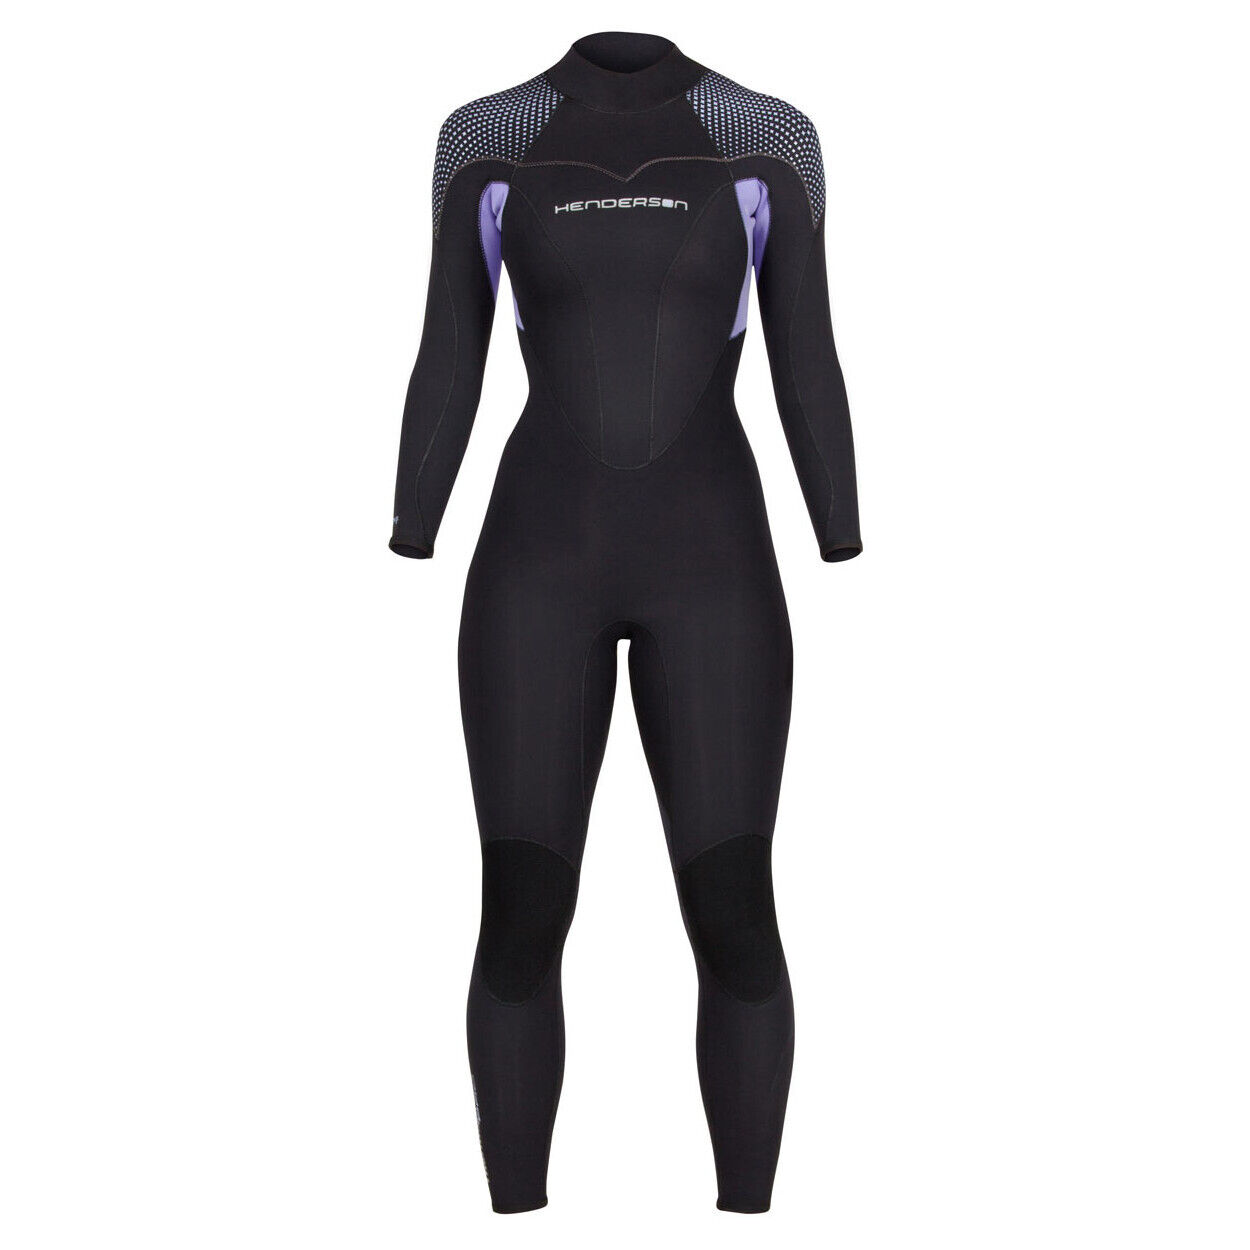 Used Henderson 5mm Womens Thermoprene Pro Back Zip Wetsuit-Black/Lavender-Size:6